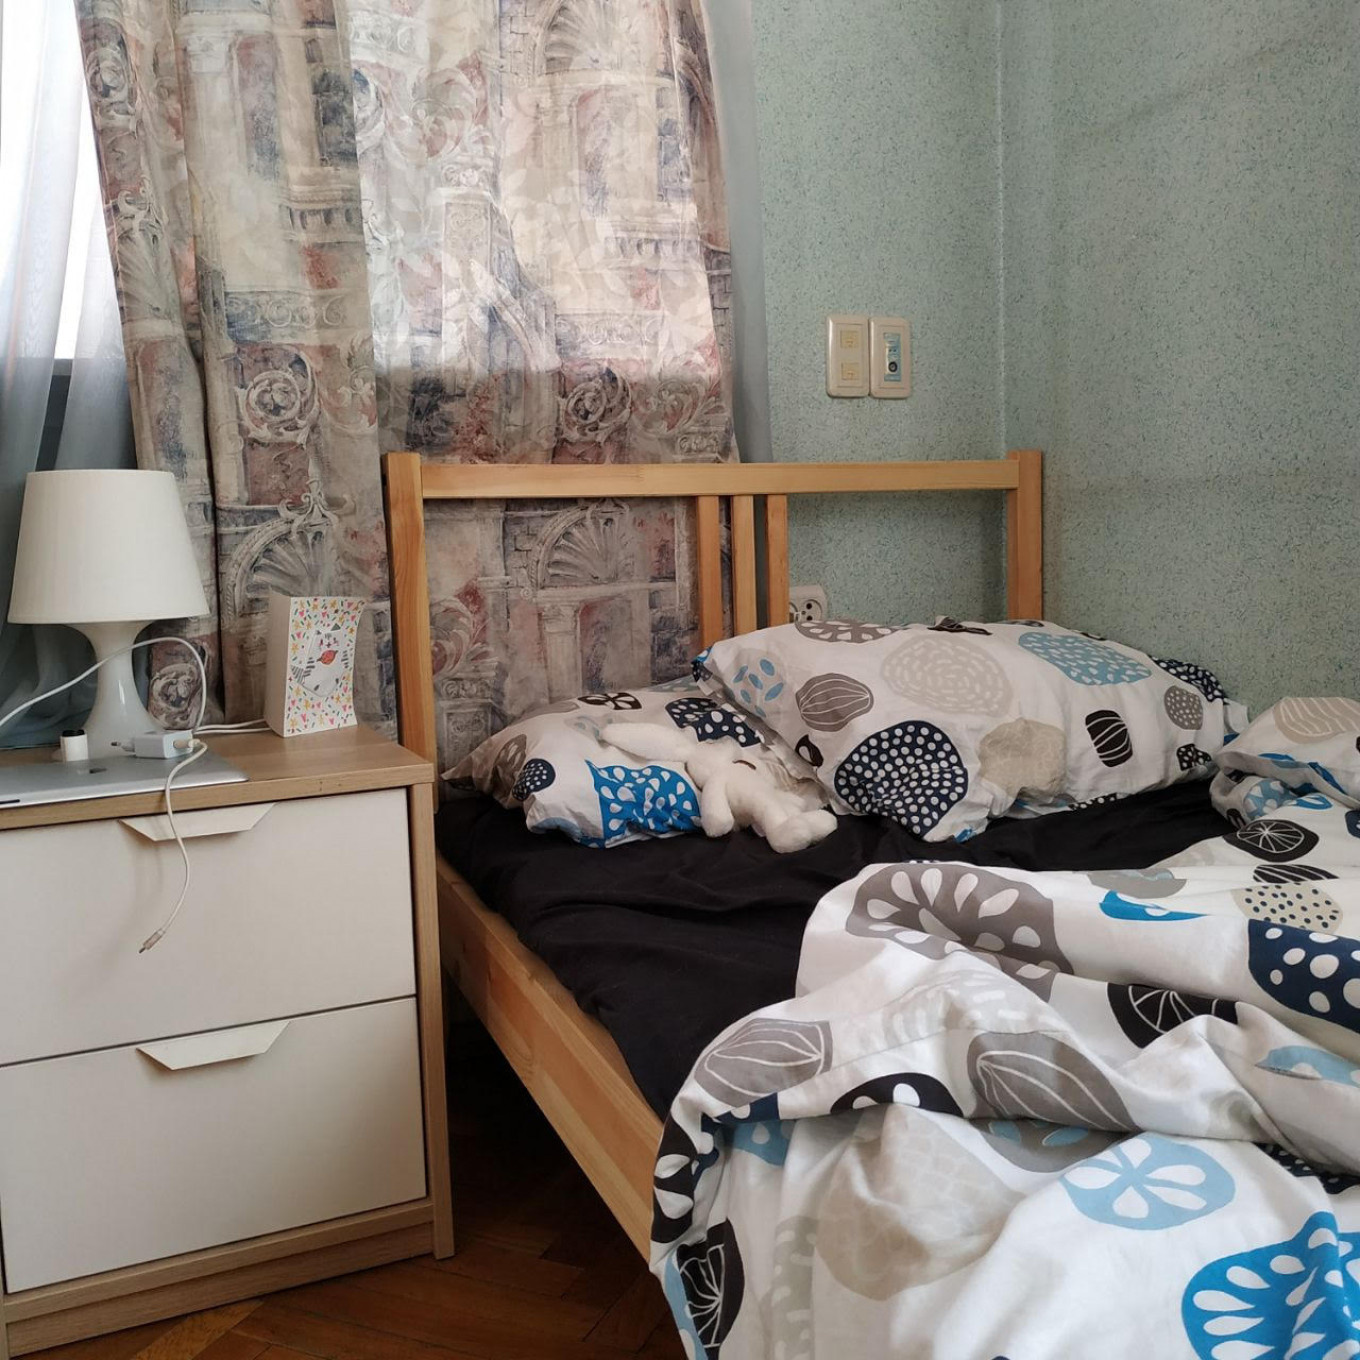 
					A bedroom inside Russia's only shelter for LGBT people.					 									